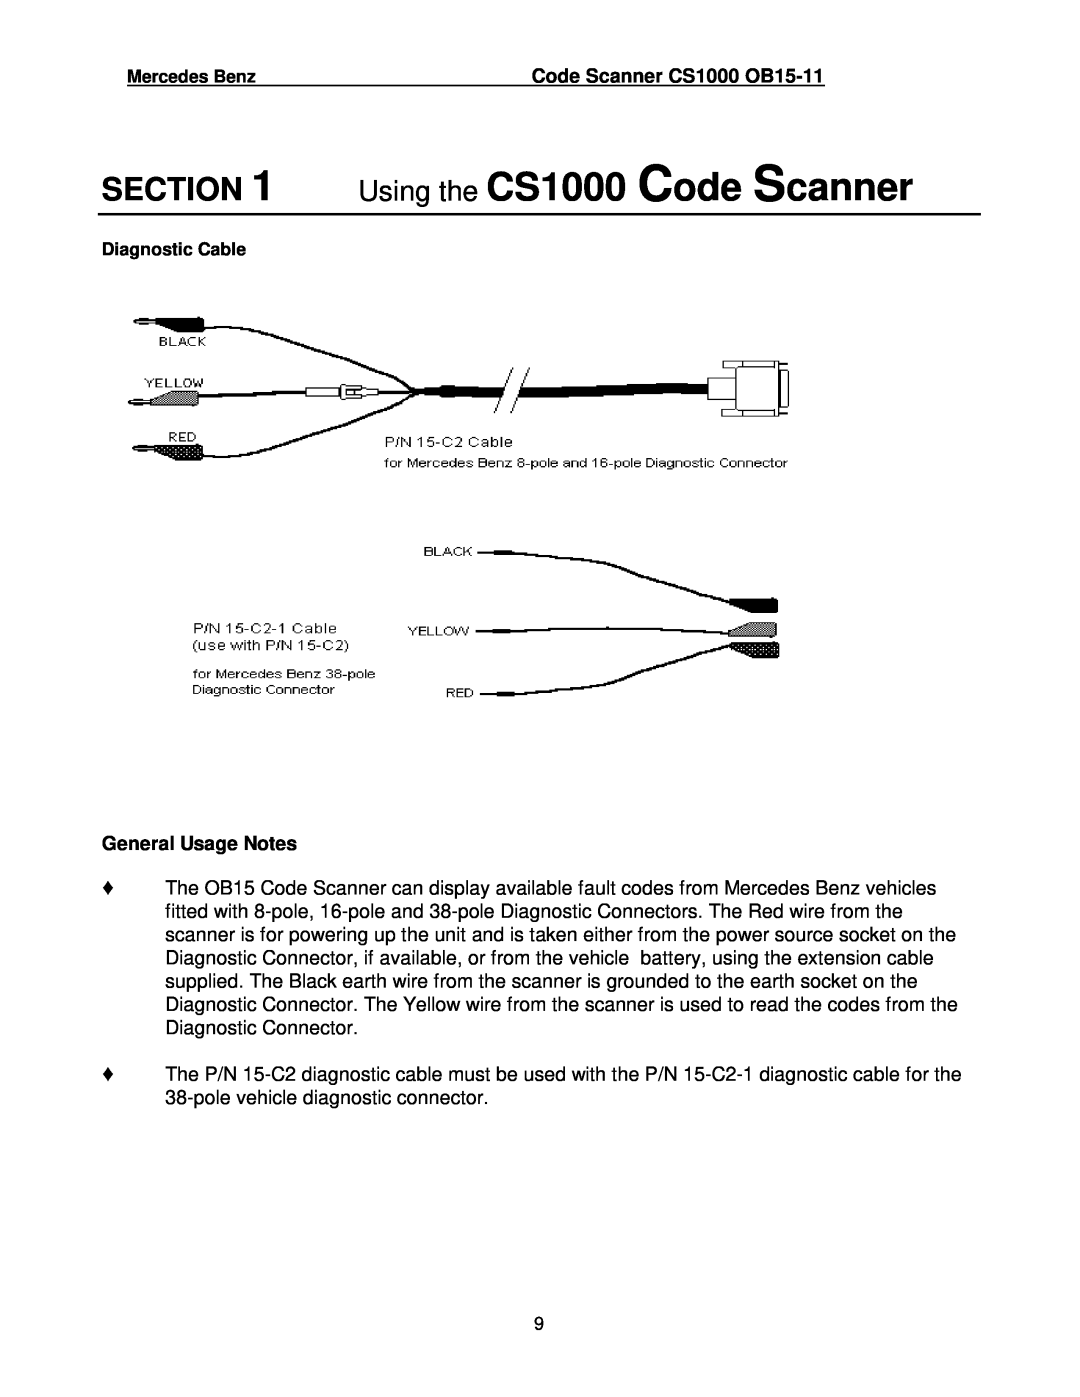 Mercedes-Benz manual Using the CS1000 Code Scanner, General Usage Notes 